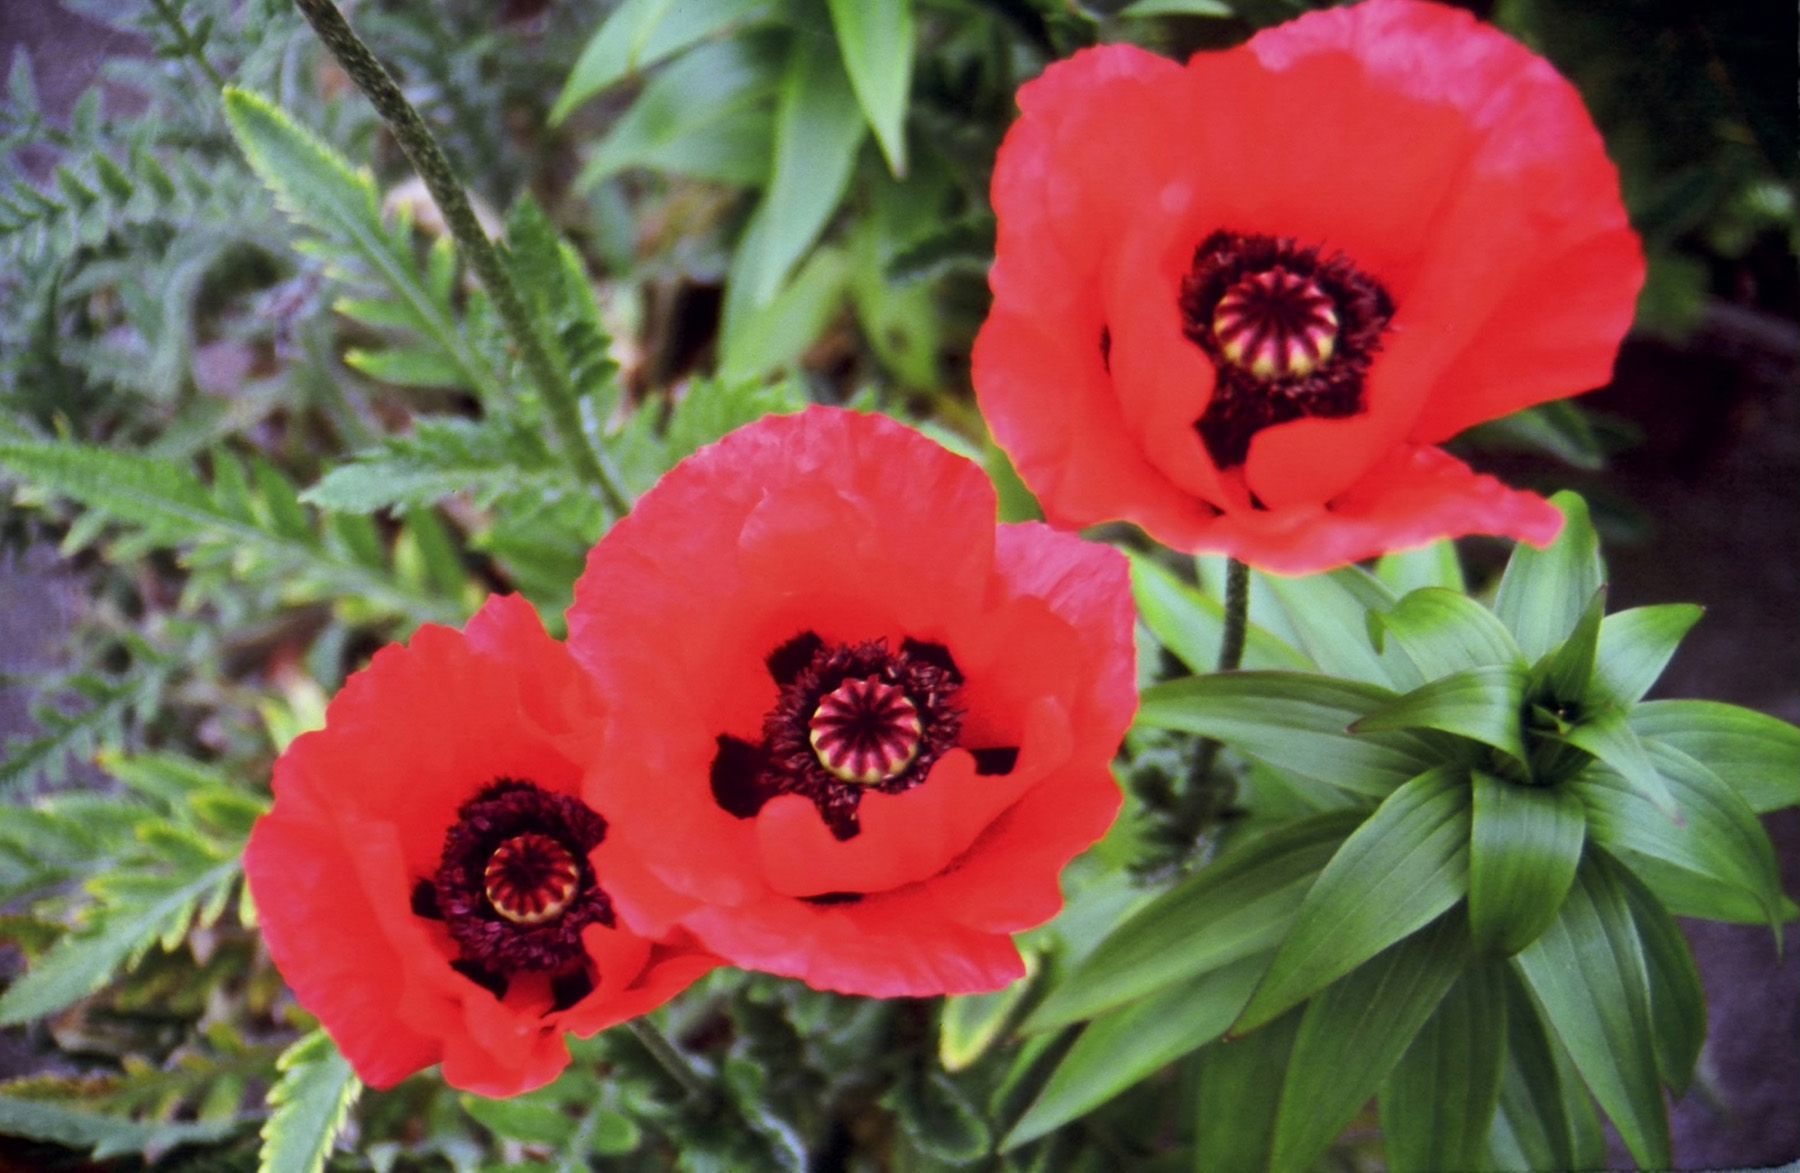 For a moment in June the Oriental poppy appears to be the perfect perennial for flower, form and color.